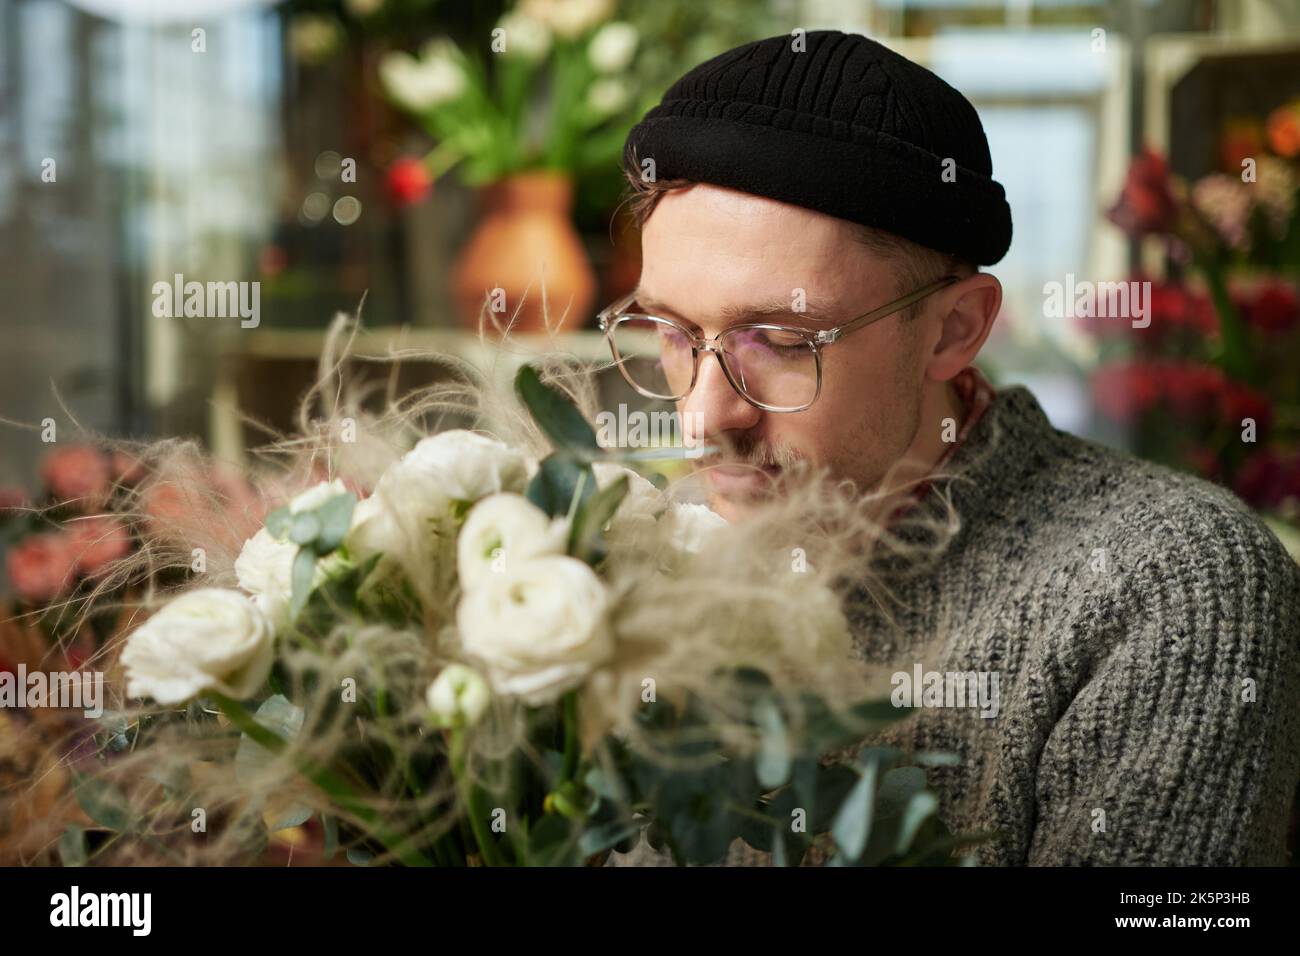 Florist male sniffing white roses bouquet in flower shop. Good looking male florist wearing sweater, beanie and eyeglasses with flower bouquet. Small business concept. High quality image Stock Photo